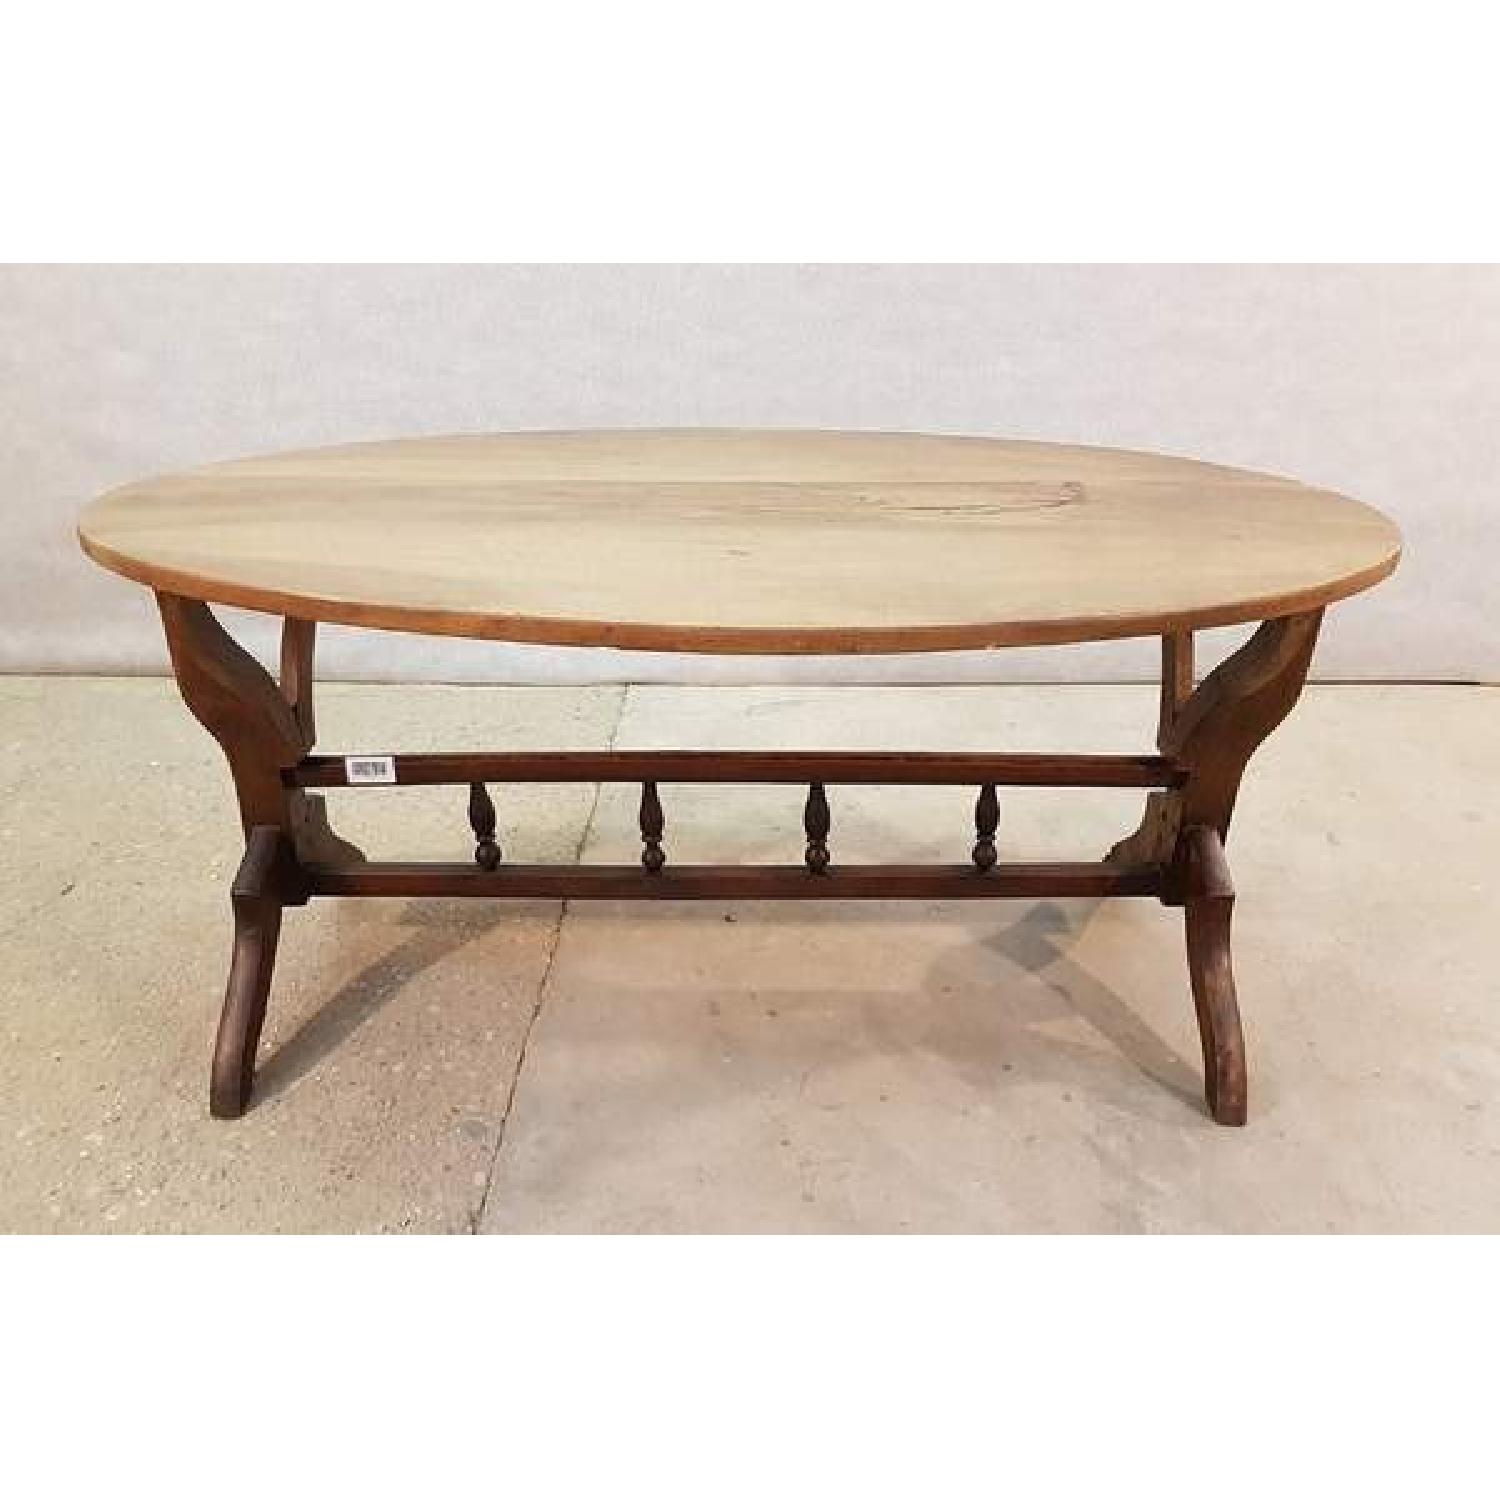 vintage dutch oval oak mid century coffee accent table aptdeco frame dining mat set target desks and chairs round folding wood bench side placemats coasters small brass diy